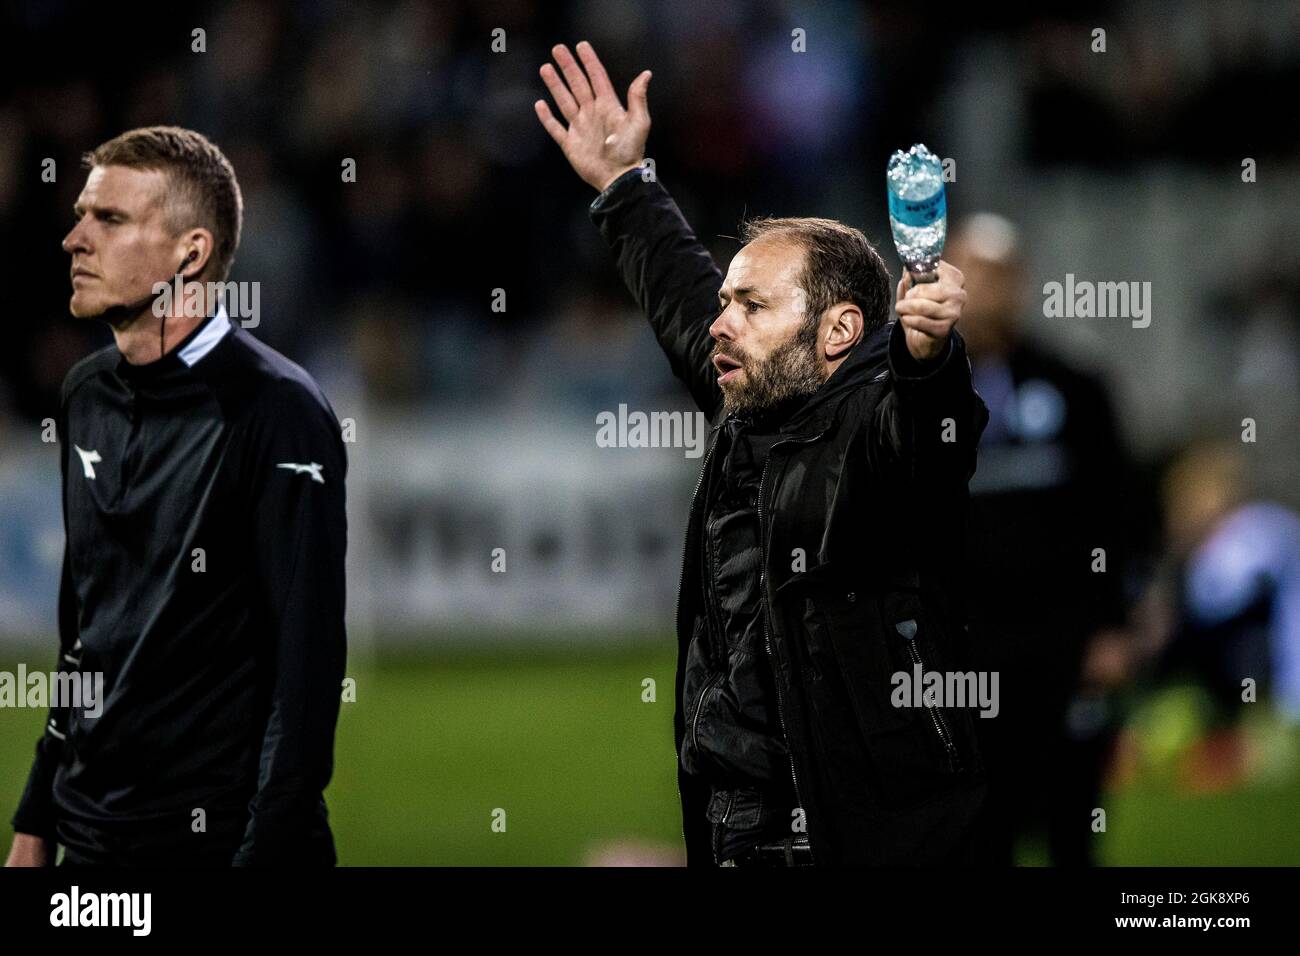 Odense, Denmark. 13th Sep, 2021. Head coach Andreas Alm of Odense Boldklub  seen during the 3F Superliga match between Odense Boldklub and Soenderjyske  at Nature Energy Park in Odense. (Photo Credit: Gonzales